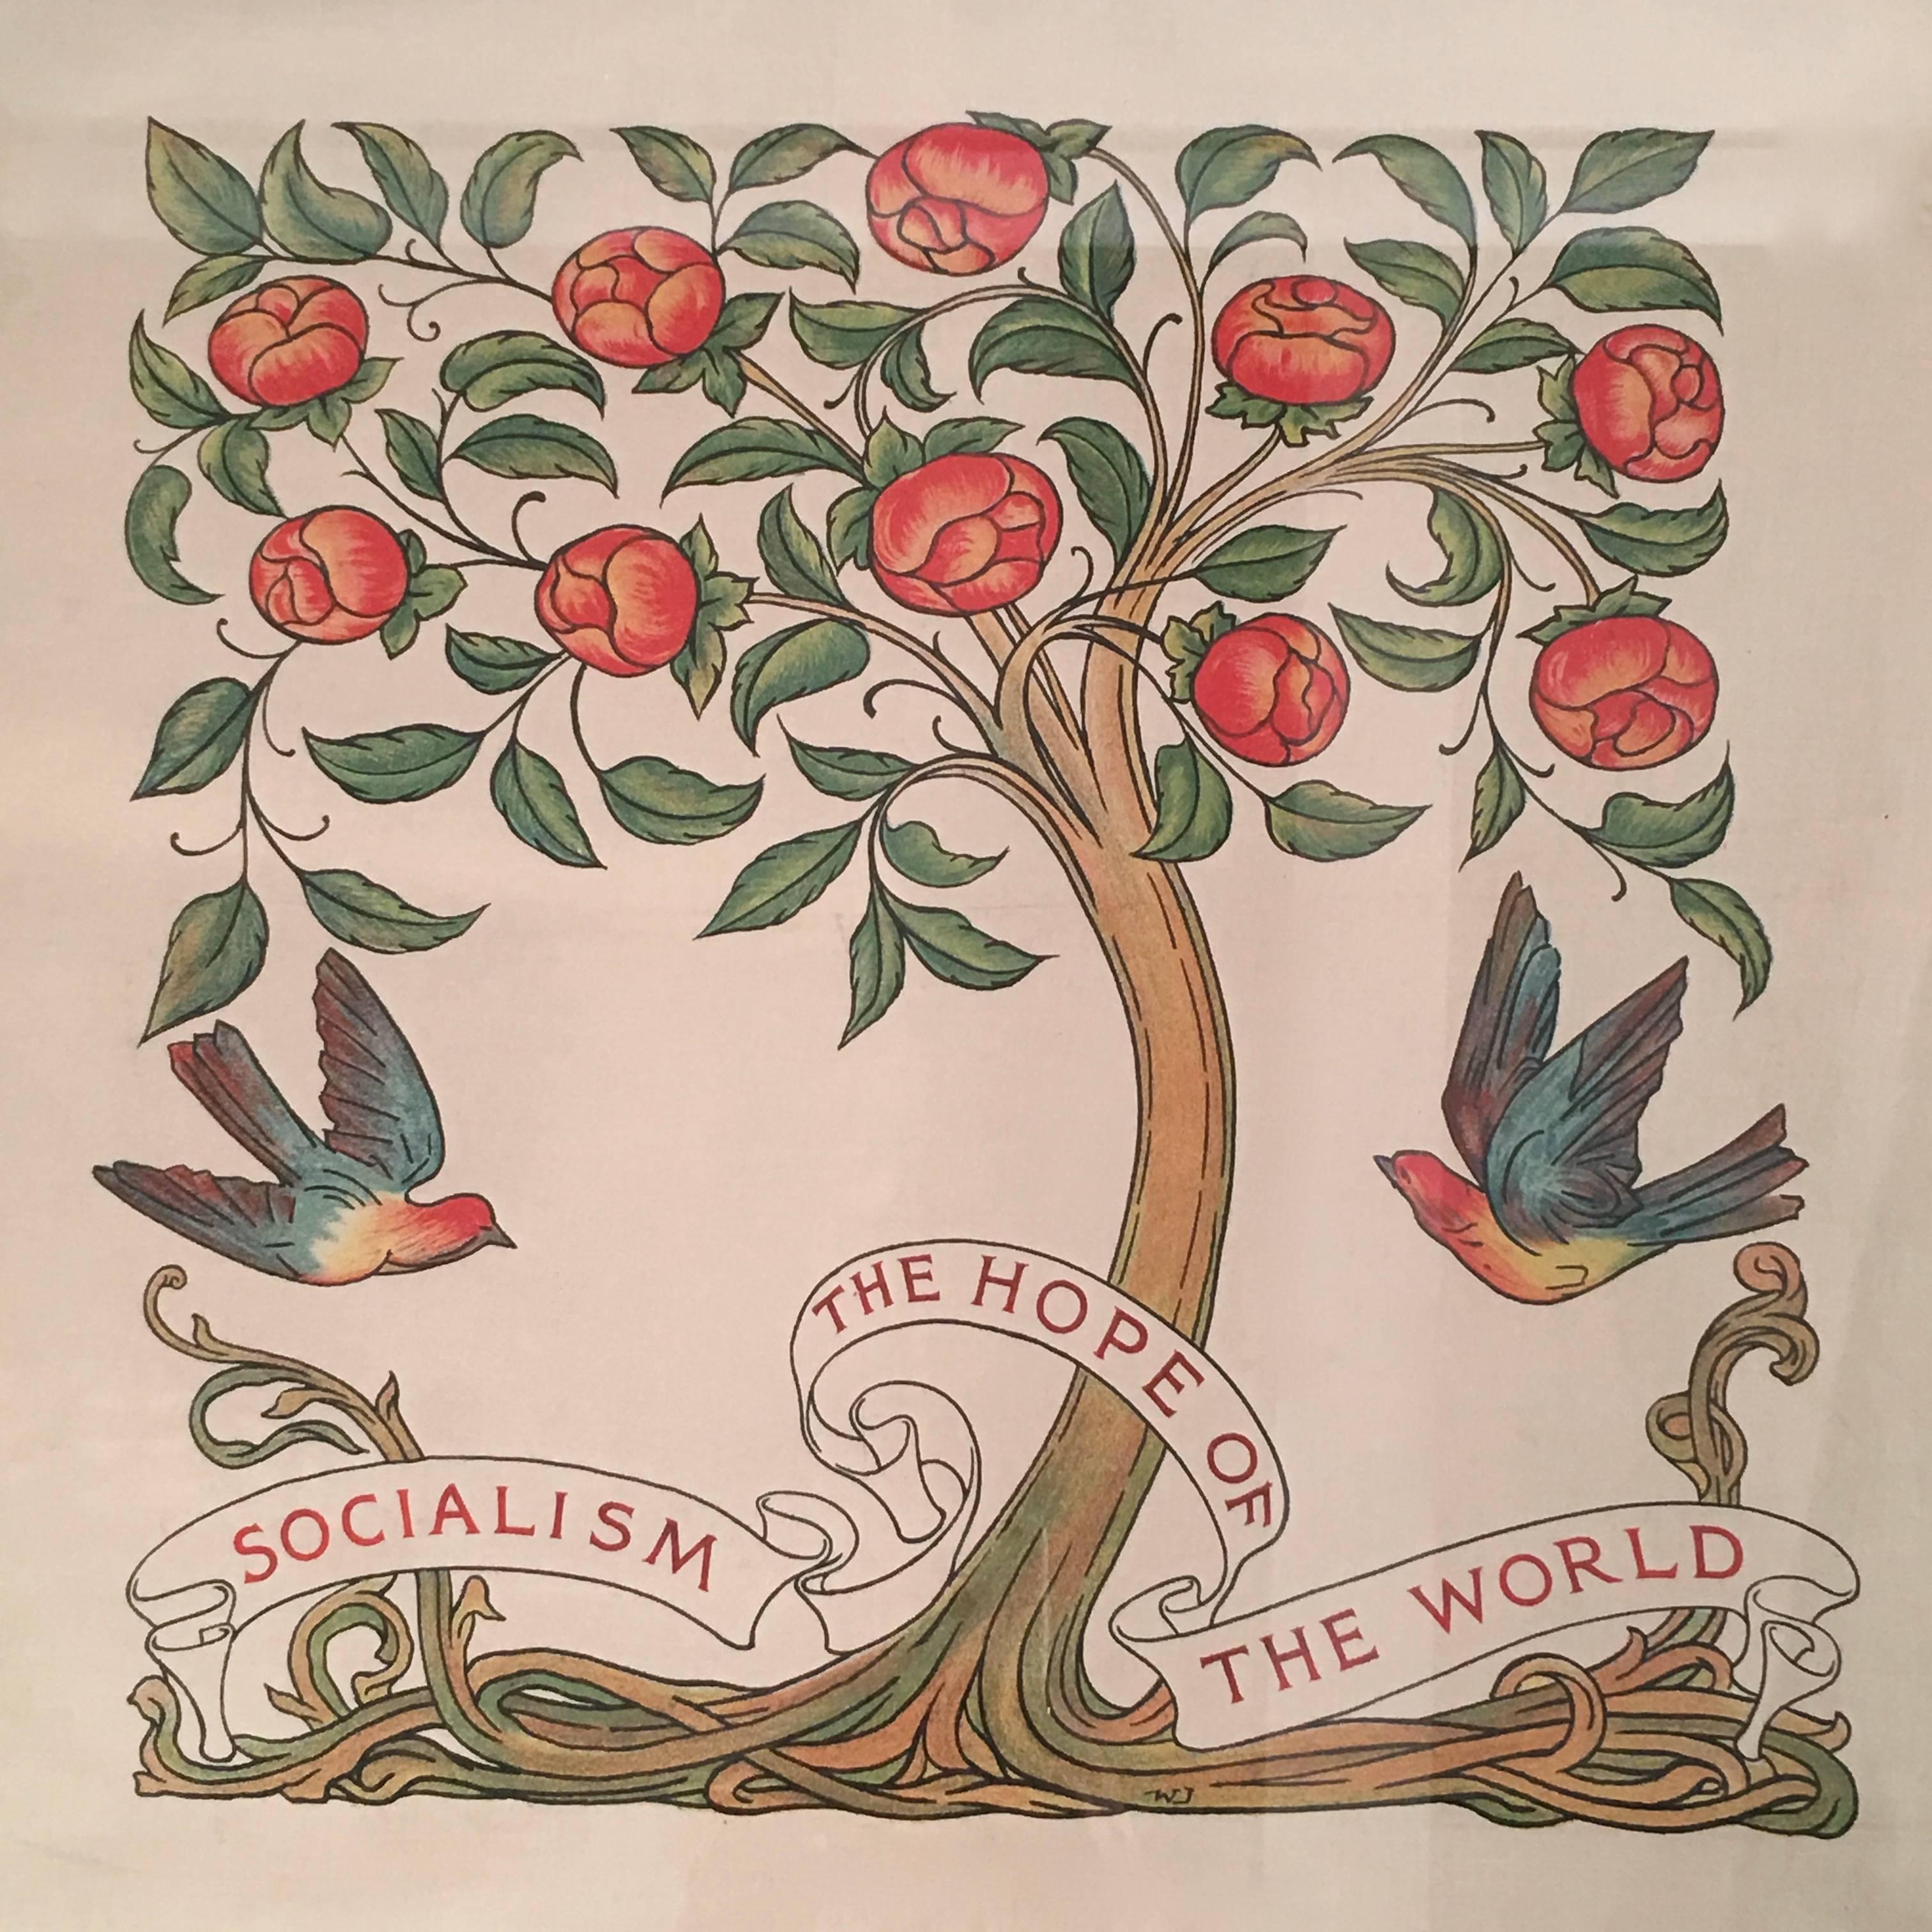 A rare, mint condition English Arts & Crafts period banner, with the words Socialism The Hope of the World in a ribbon banner below two flying birds flanking a beautifully stylized tree with rose blossoms, in the manner of William Morris, with the